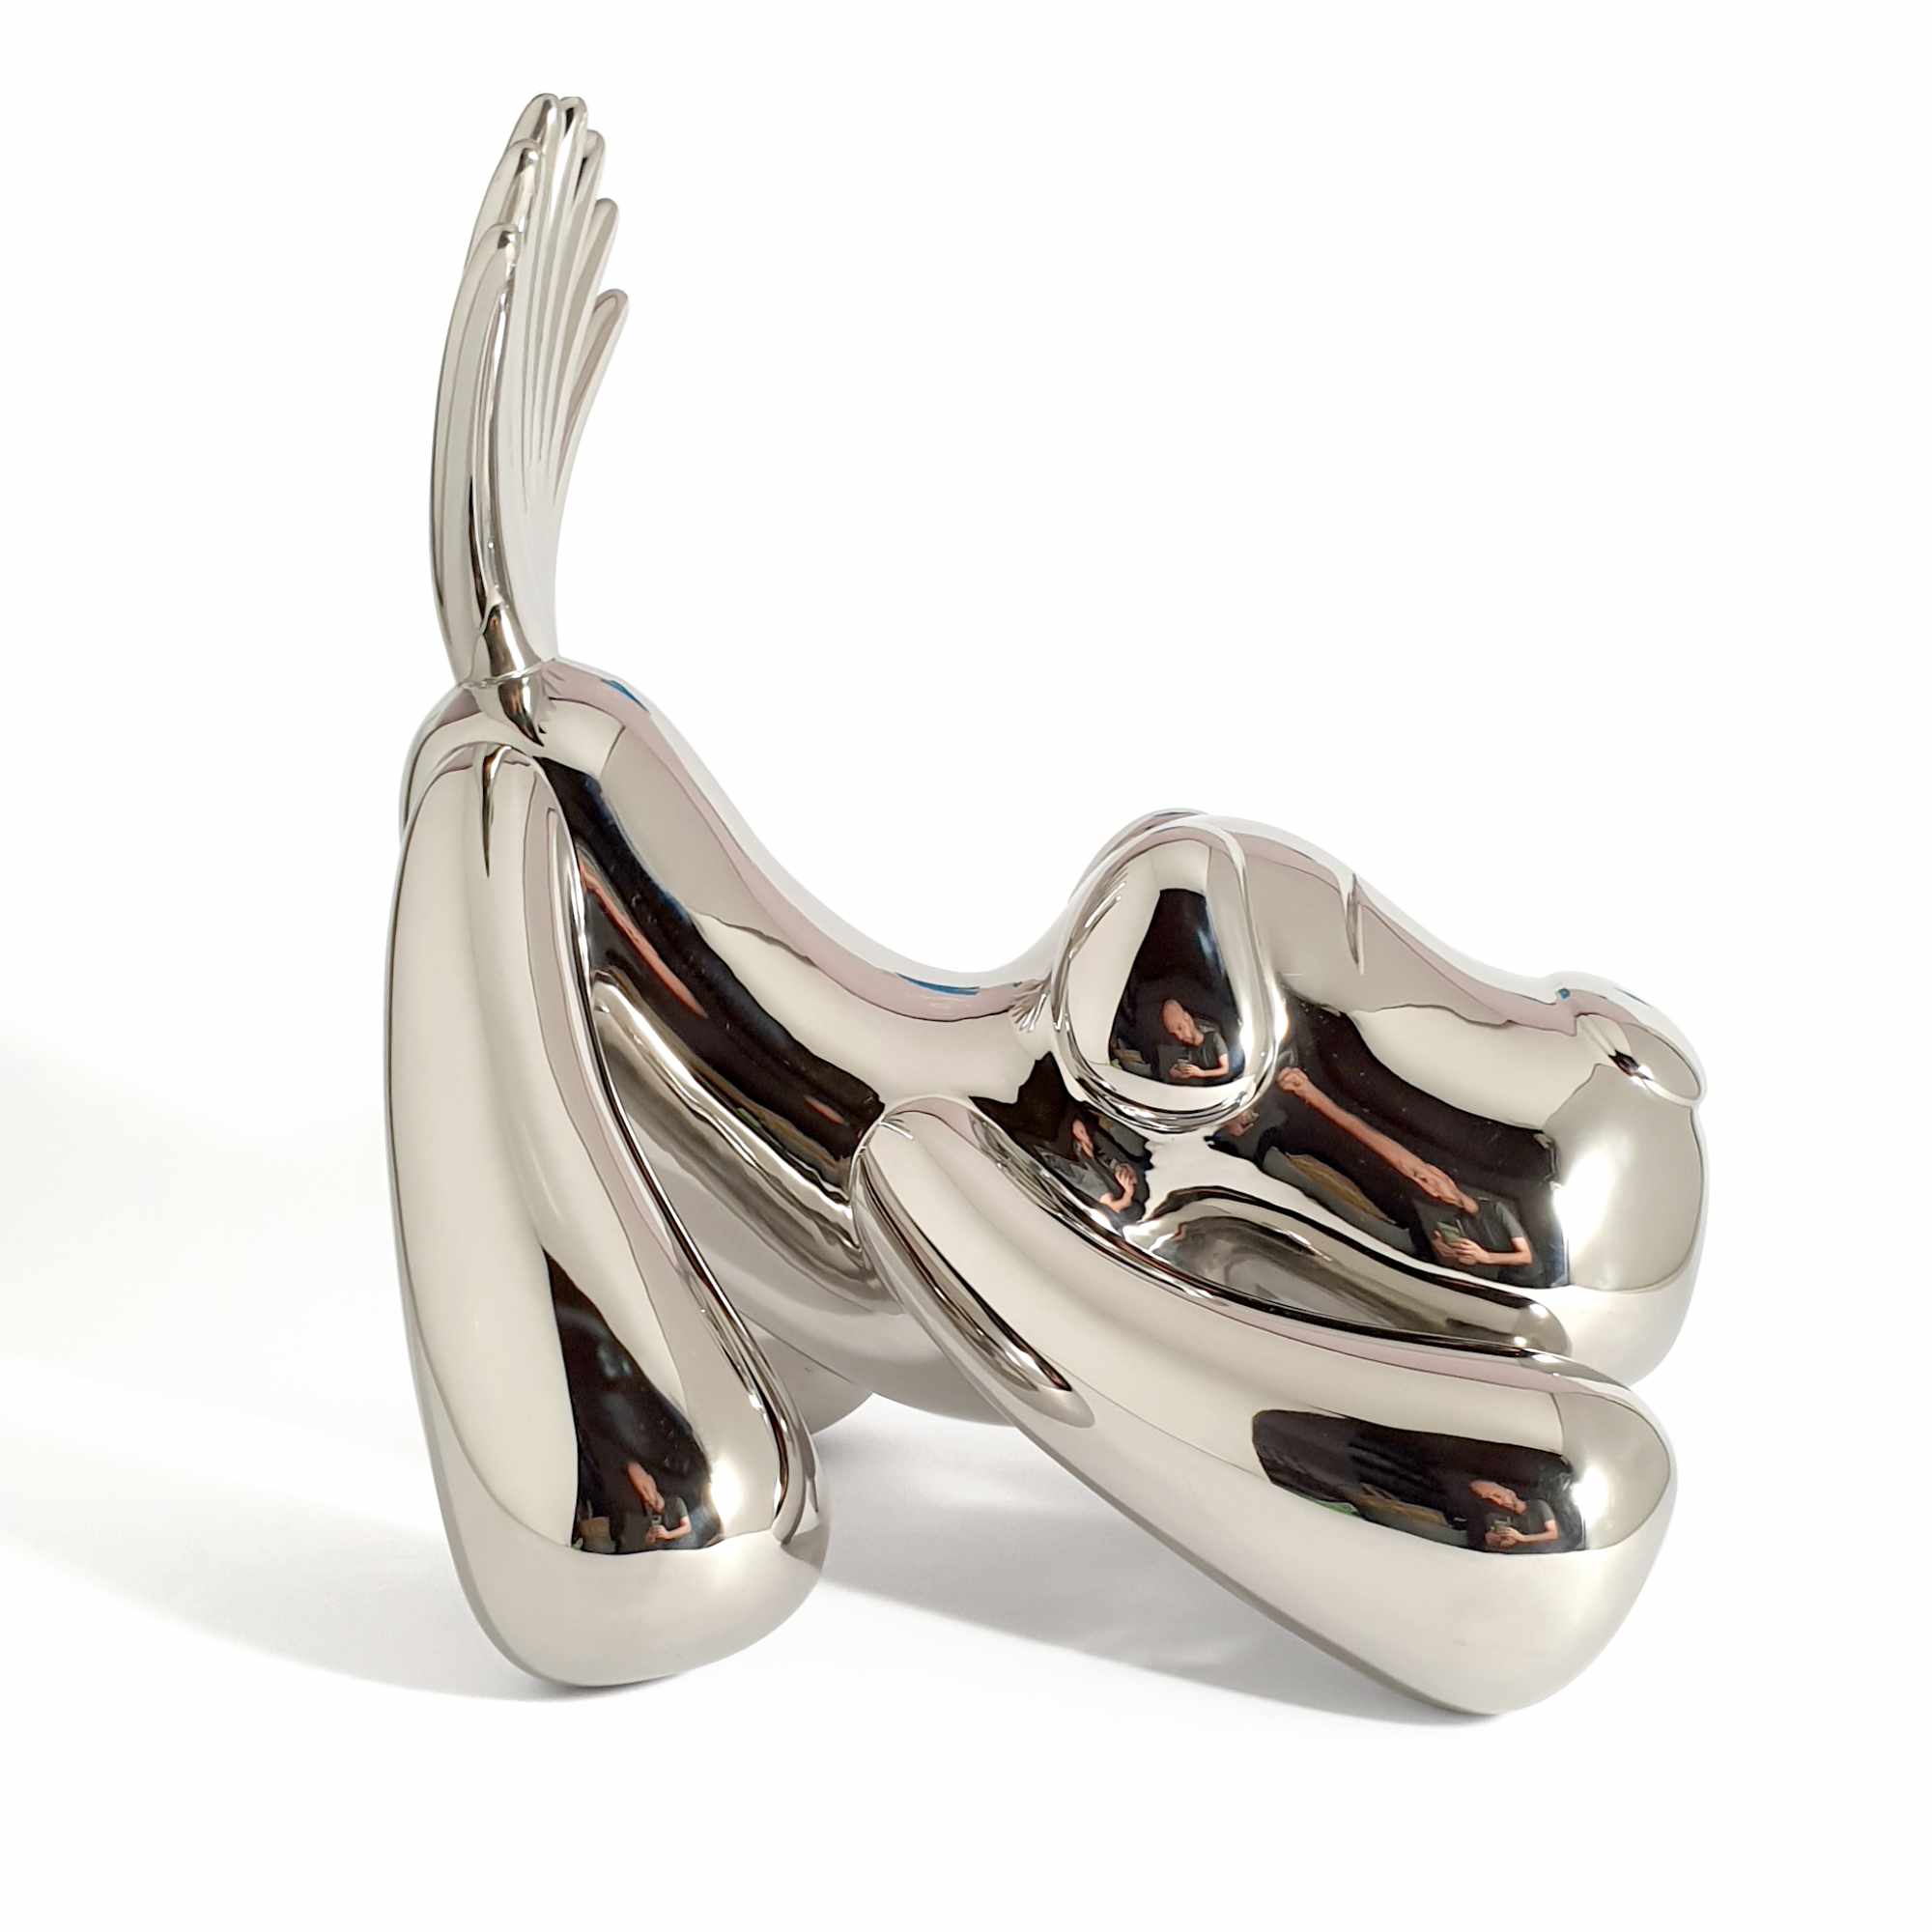 Wagging the dog, dog wagging tail sculpture, Mirror Polished Stainless Steel Sculpture, by artist Ferdi B Dick, side view